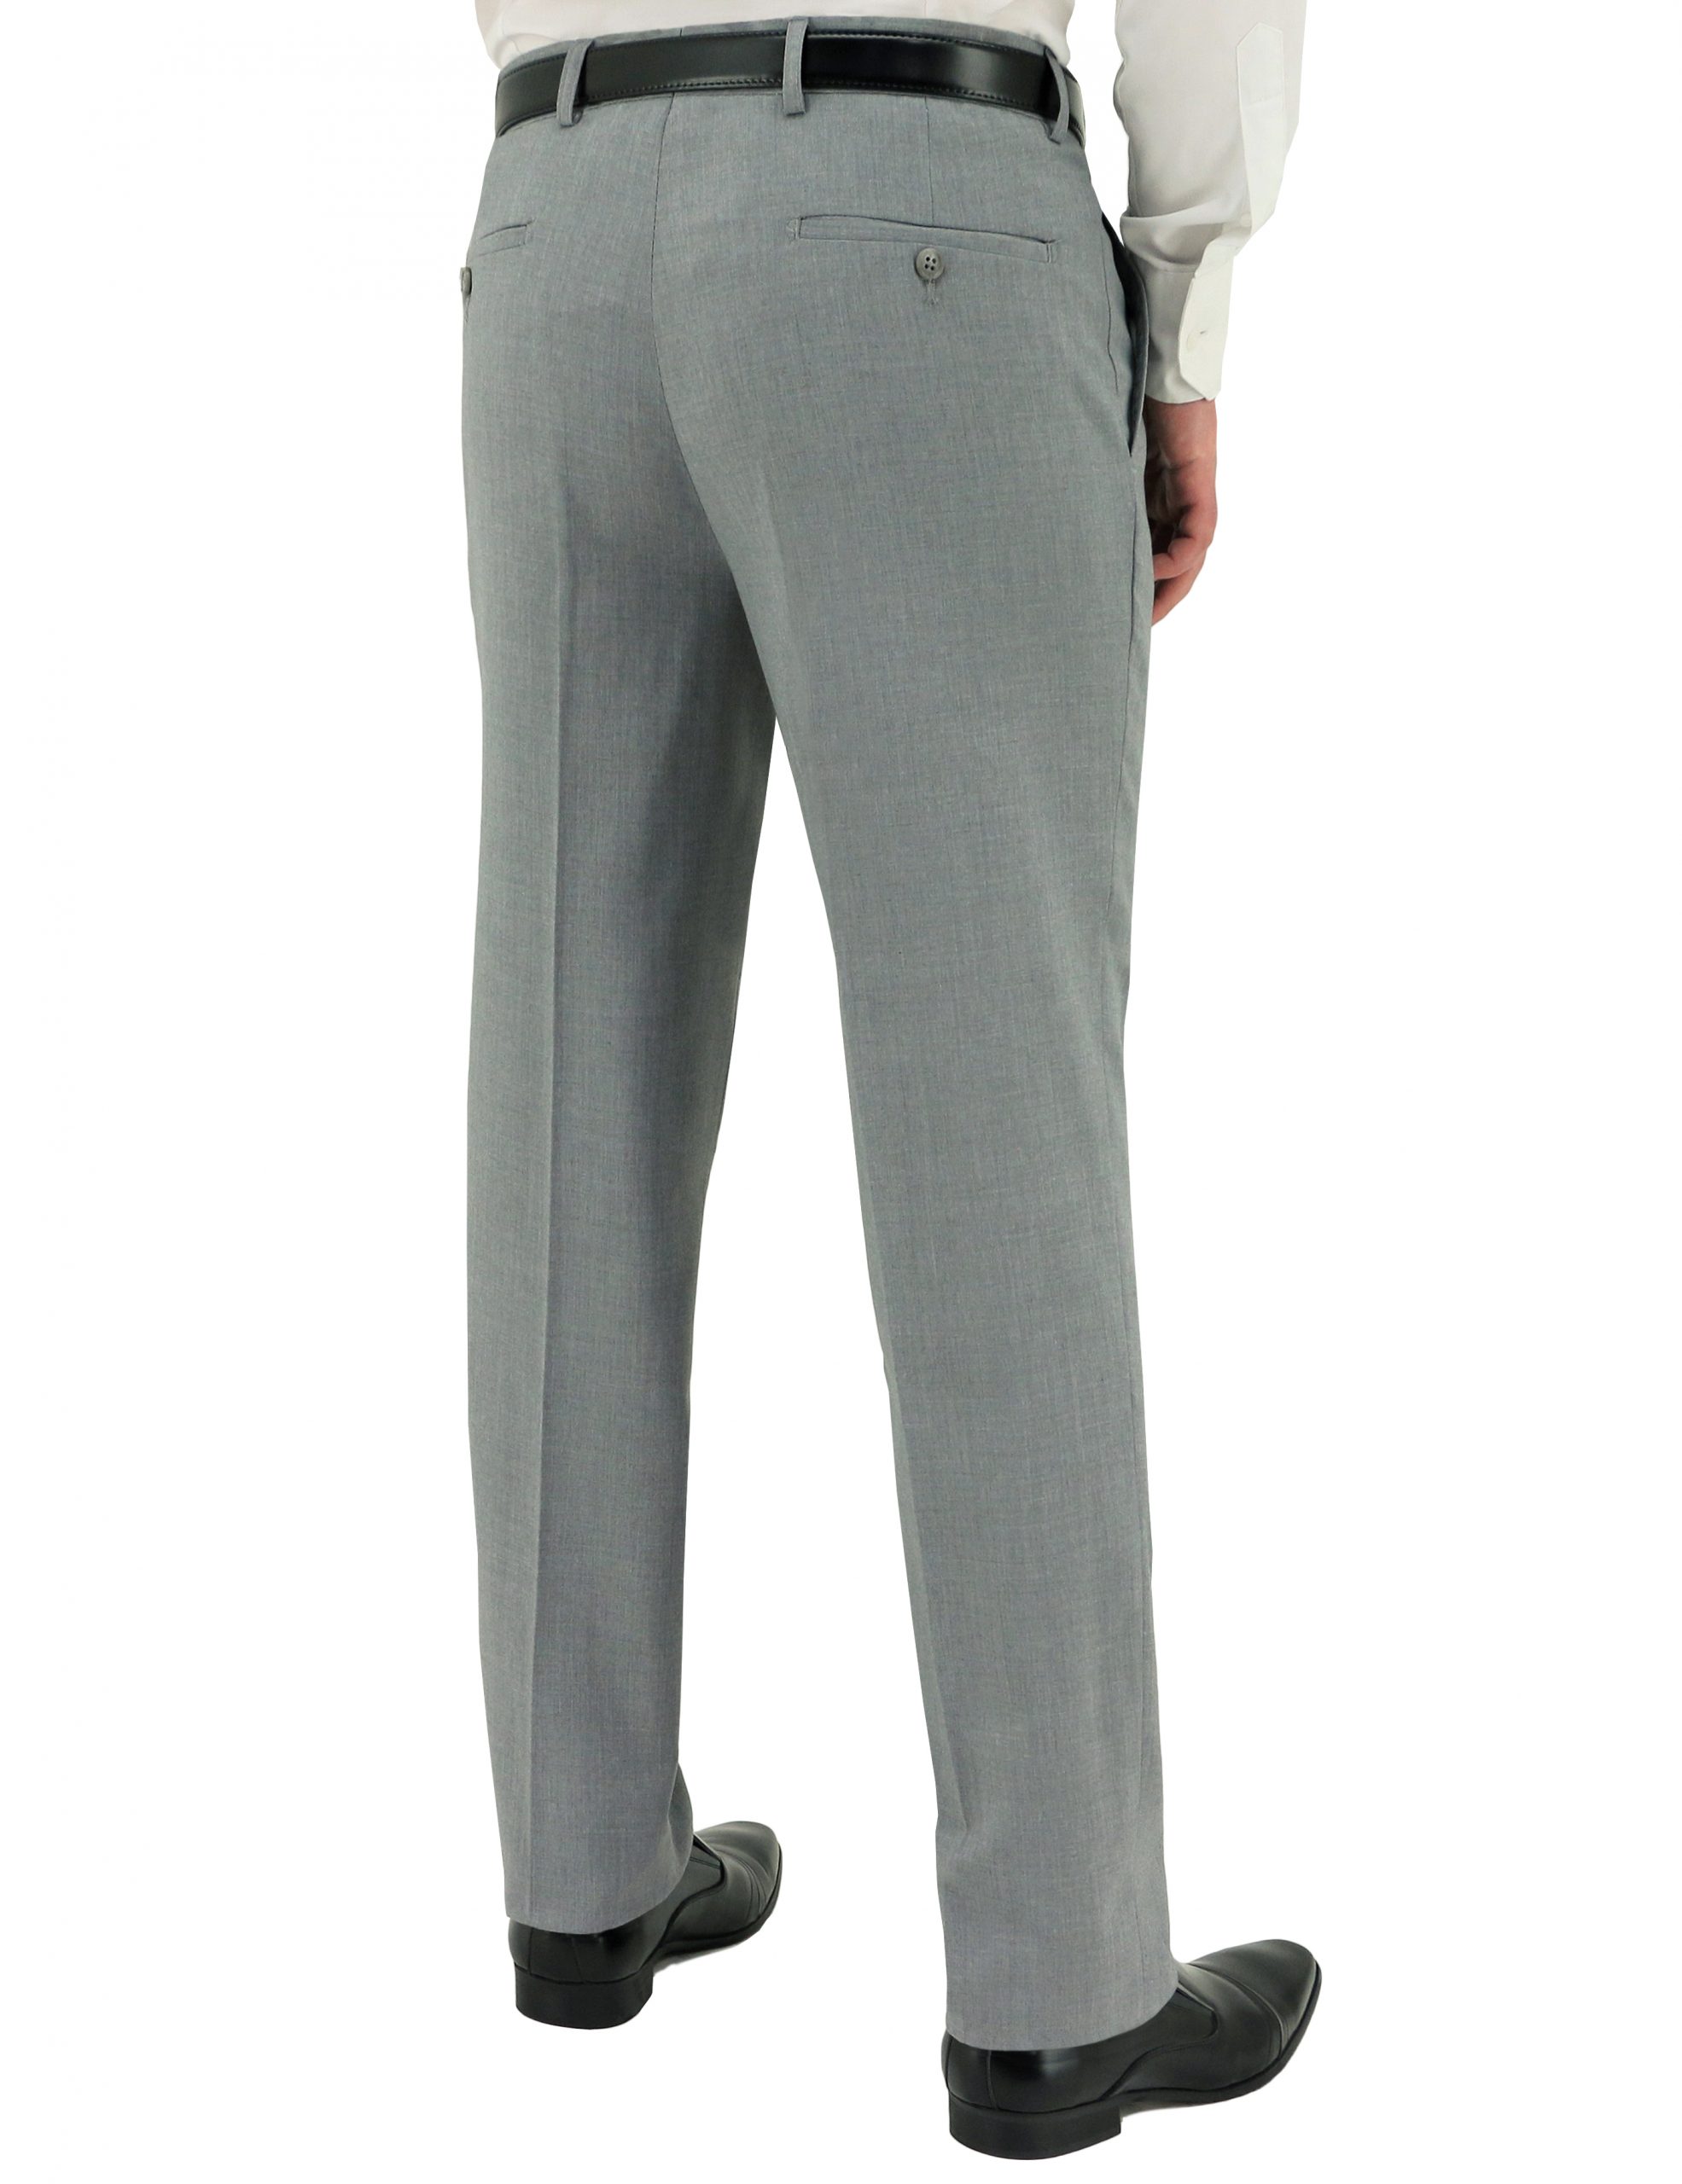 Light Grey Harley Trouser - Spectre Collection